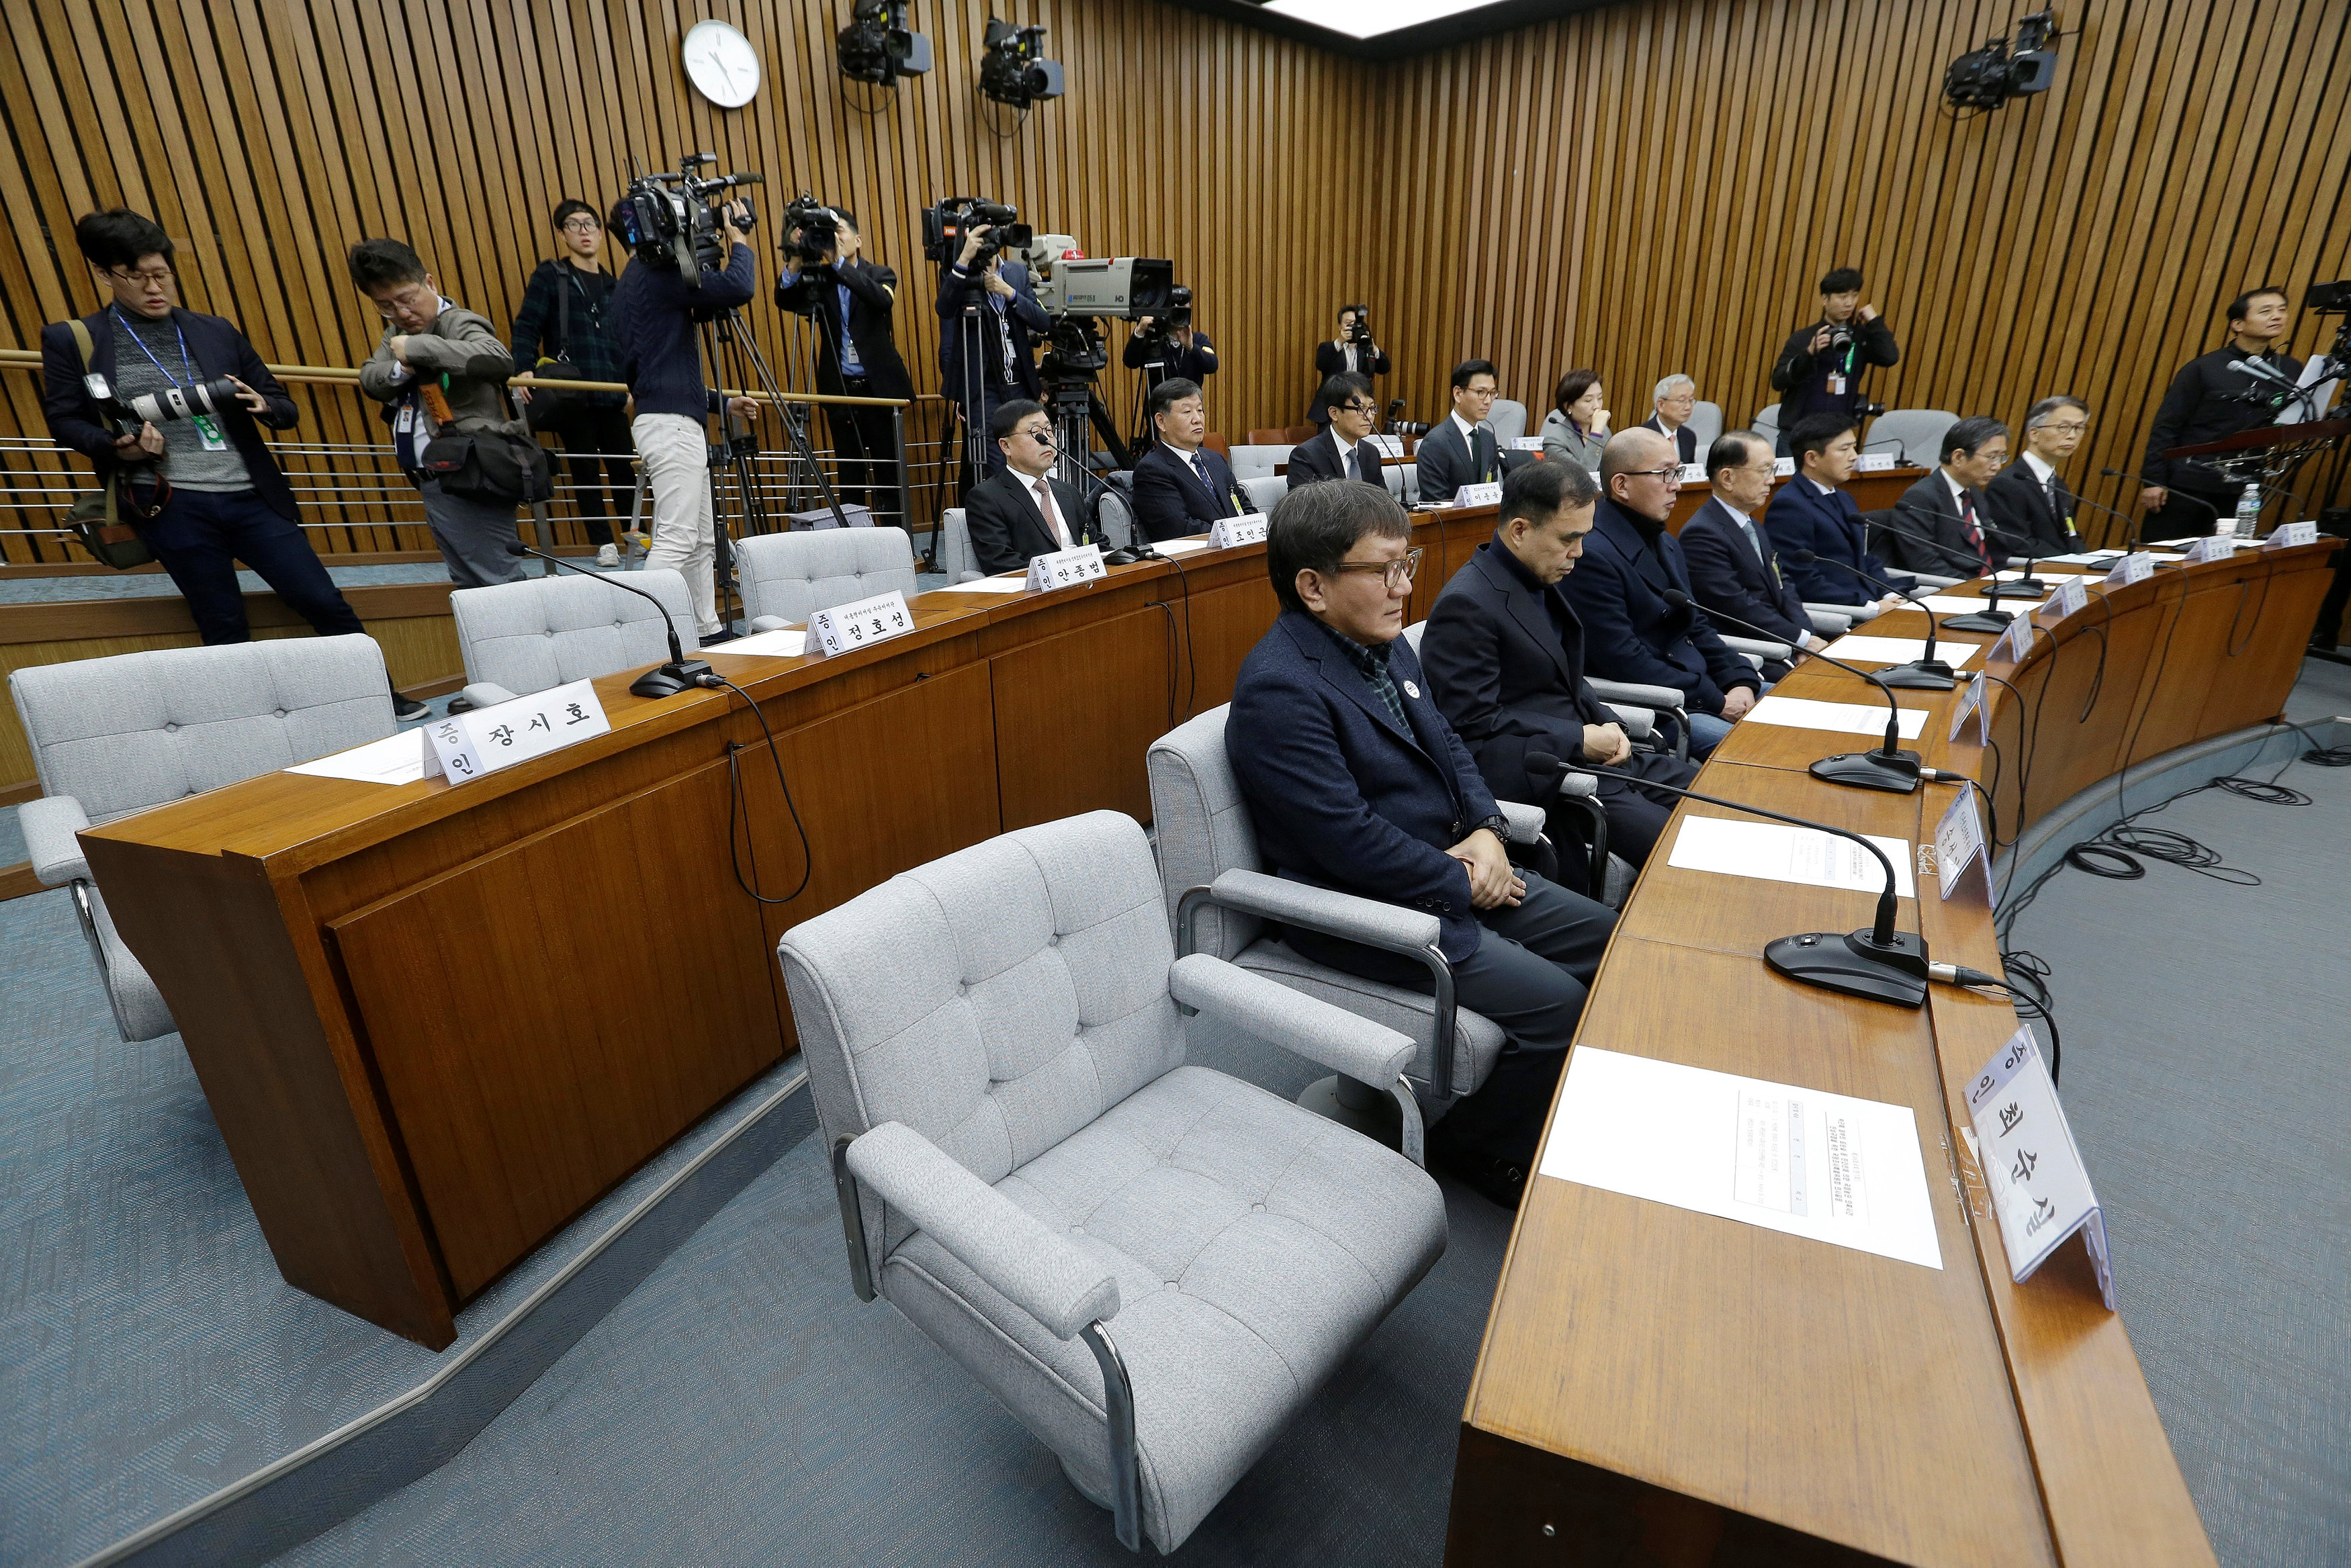 The empty seat, bottom right, of Choi Soon-sil, who is accused of colluding with South Korean President Park Geun-hye to control government affairs and extort companies, is seen during a hearing at the National Assembly in Seoul, South Korea Dec. 7, 2016.